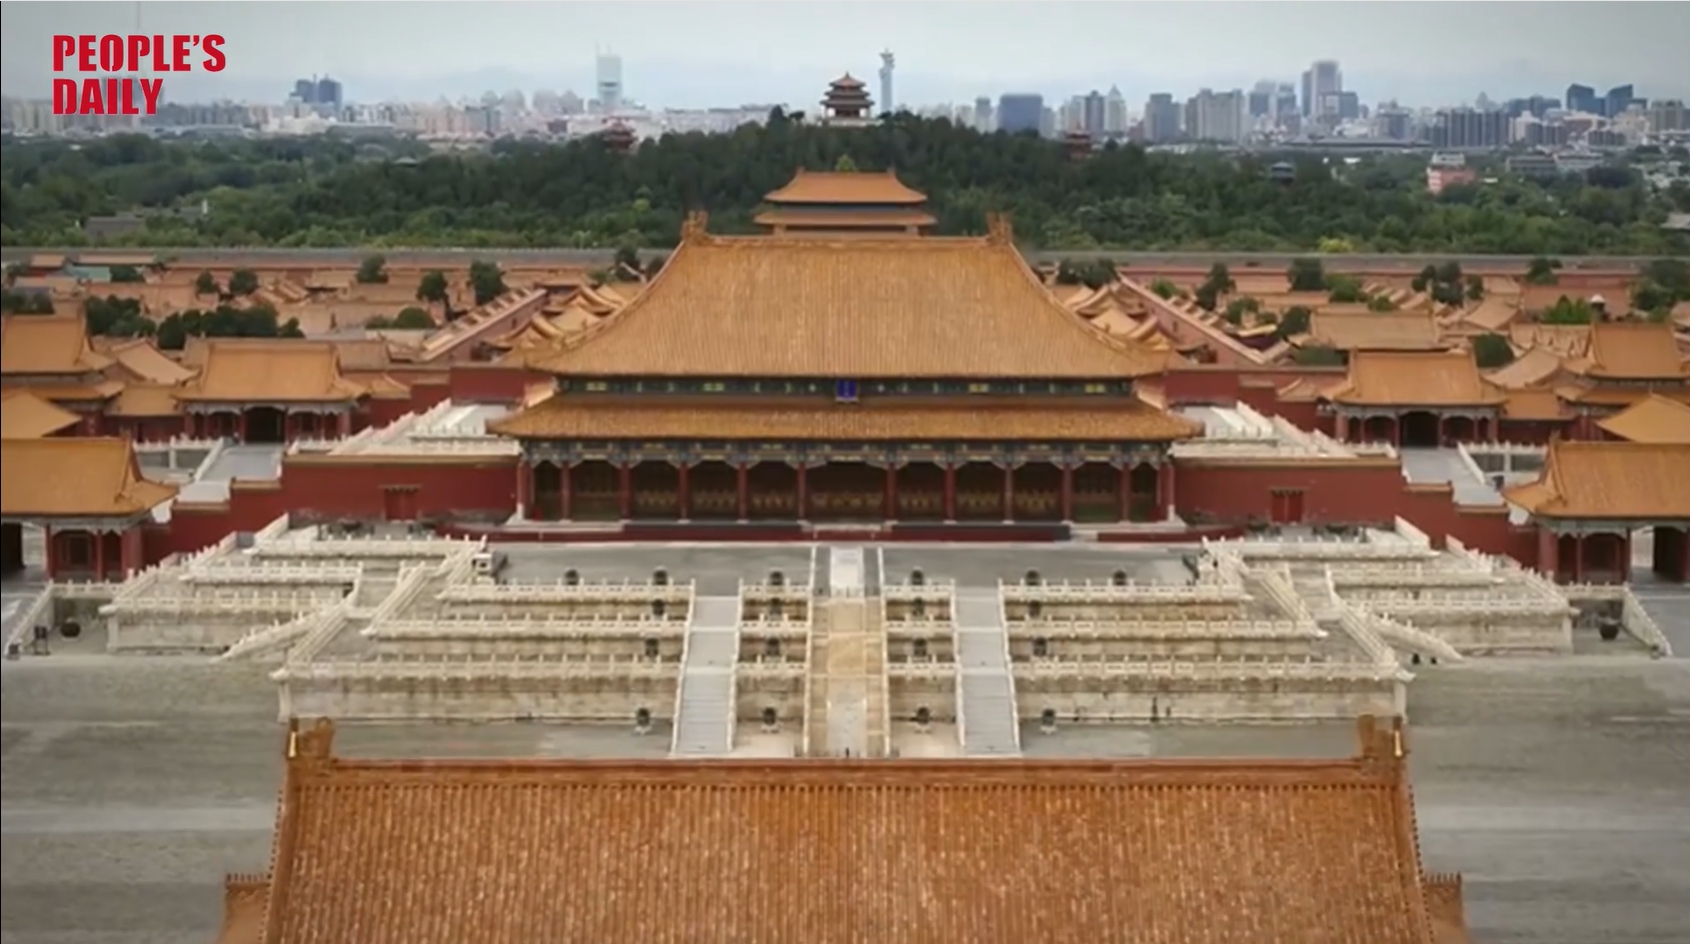 Exhibition 'The Forbidden City and the Palace of Versailles' opens in Beijing